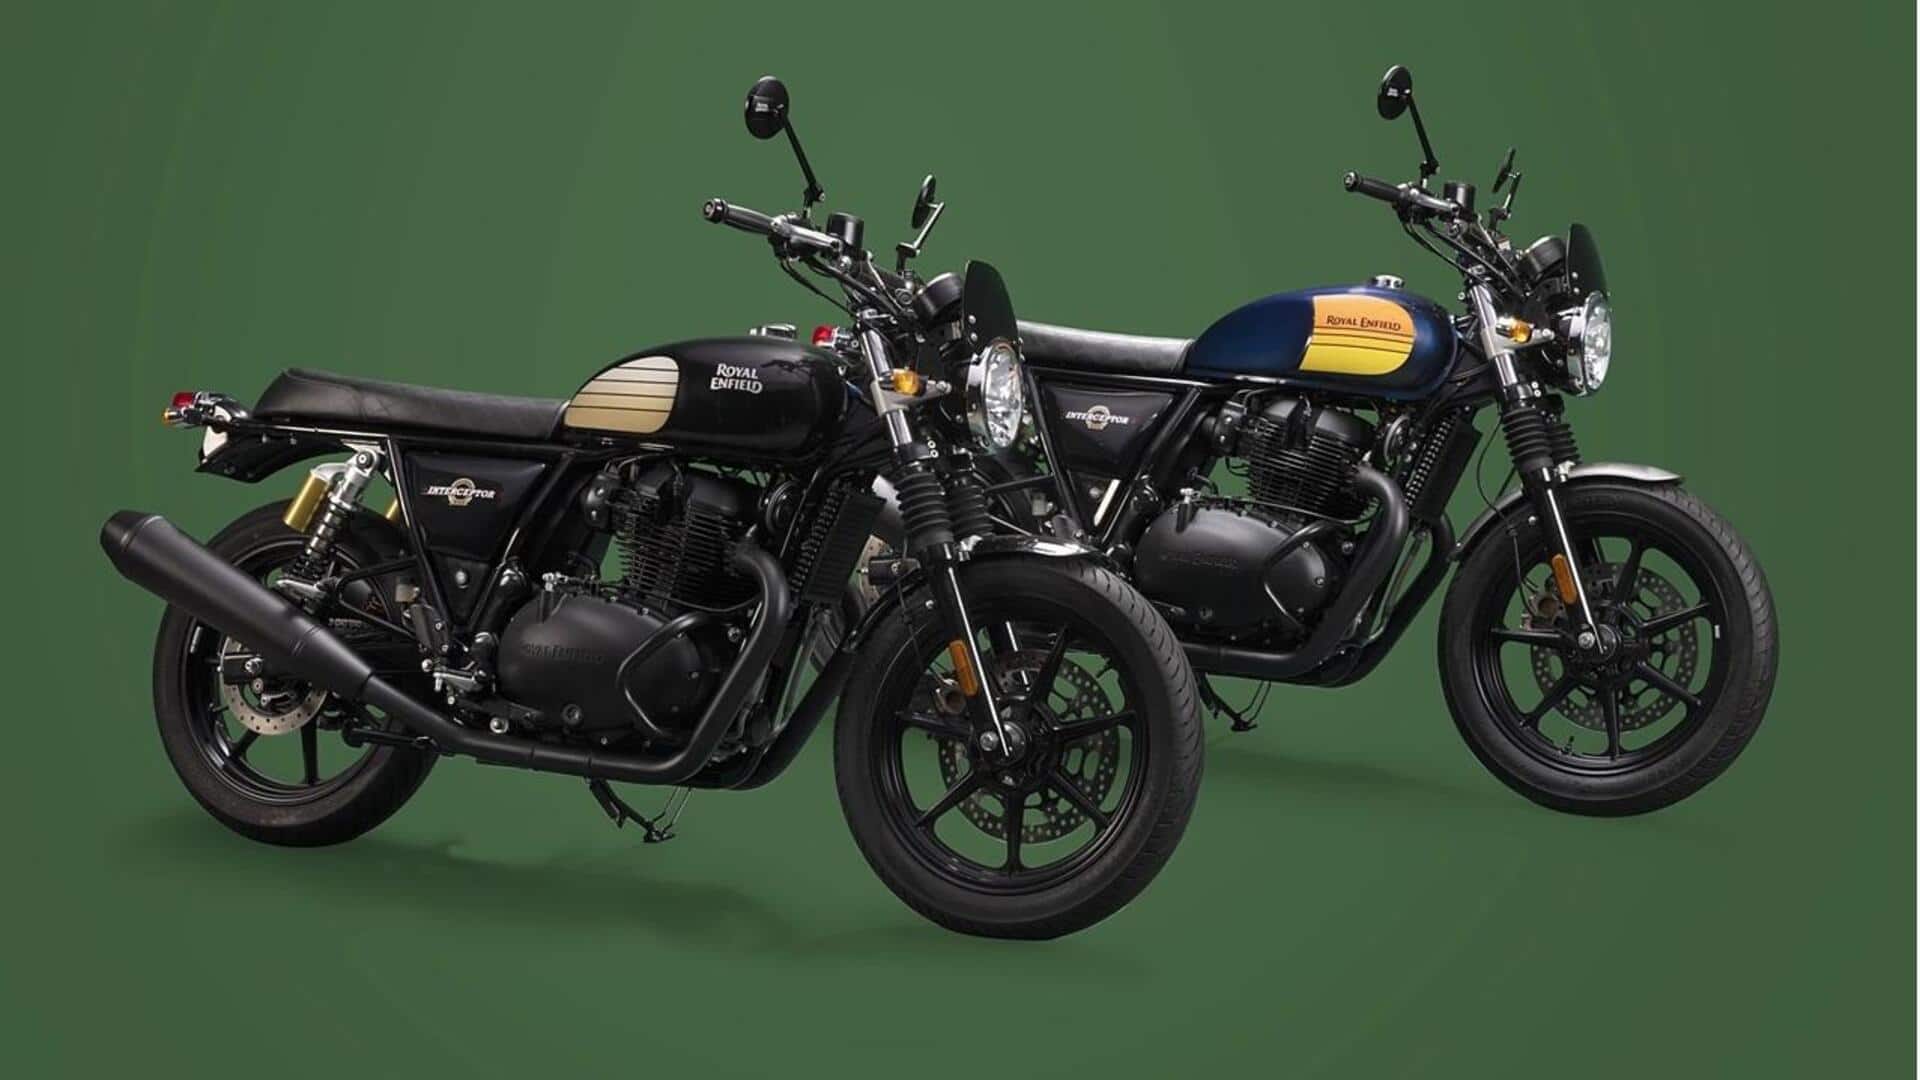 Best Royal Enfield 650cc model to buy in India